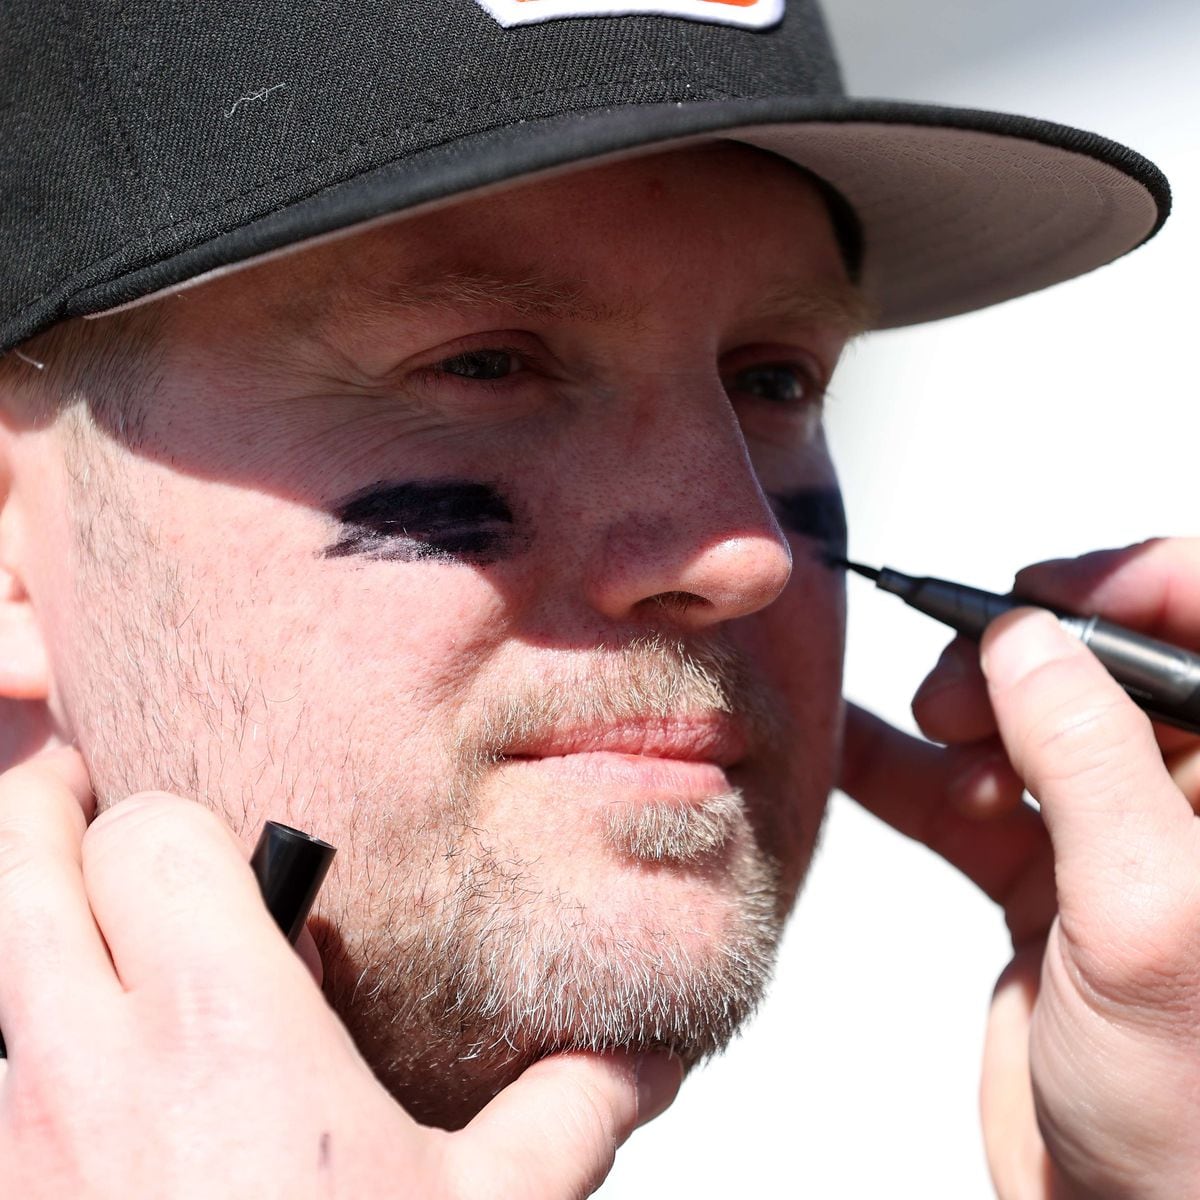 Close Up Of Little League Baseball Players Face Showing Eye Black